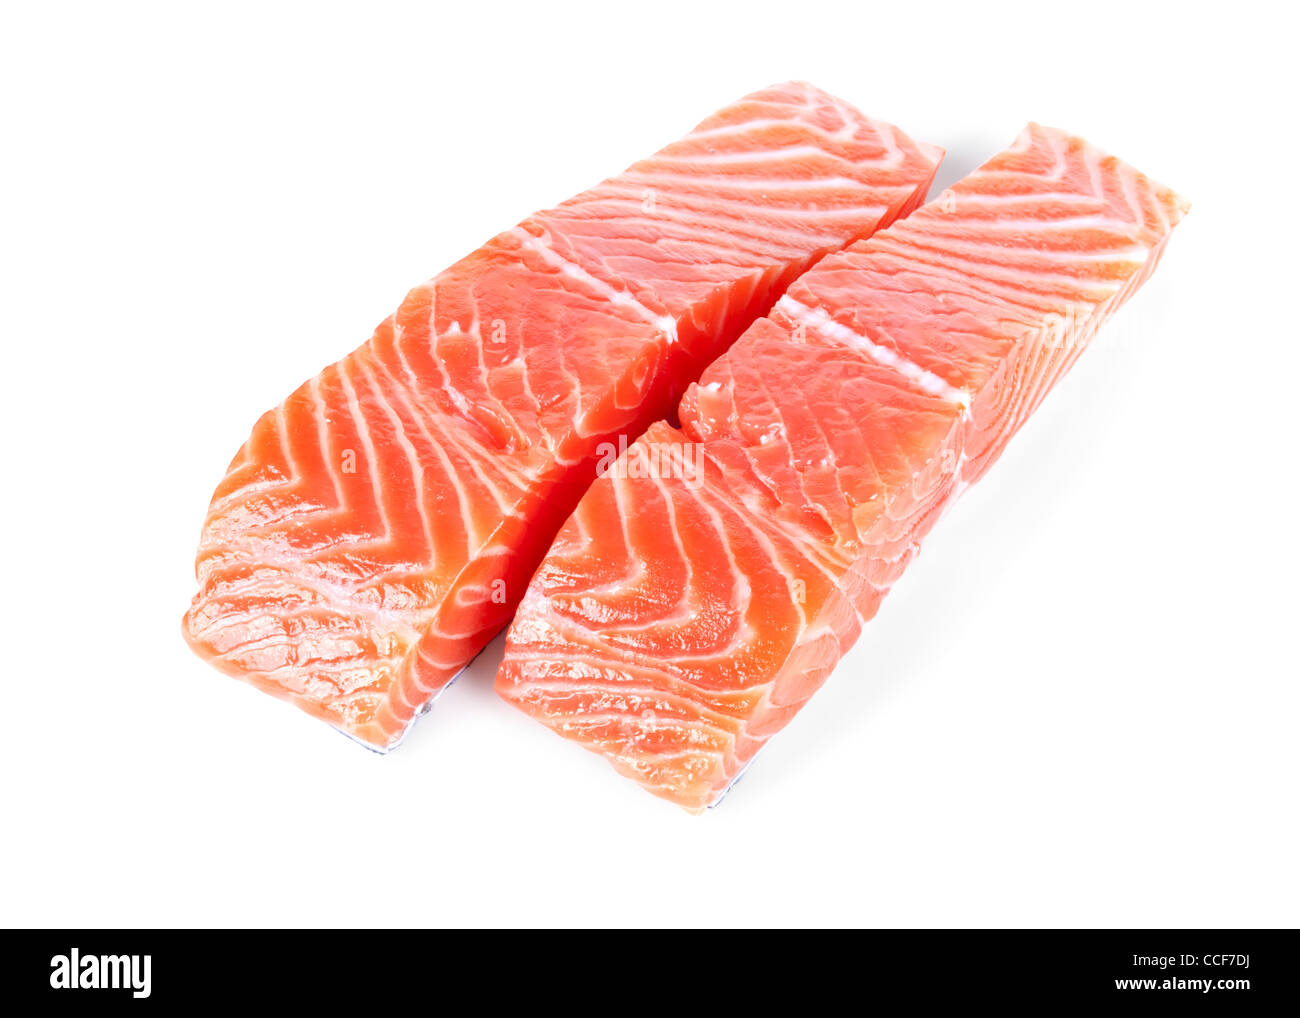 two slices trout fillet isolated on white background Stock Photo